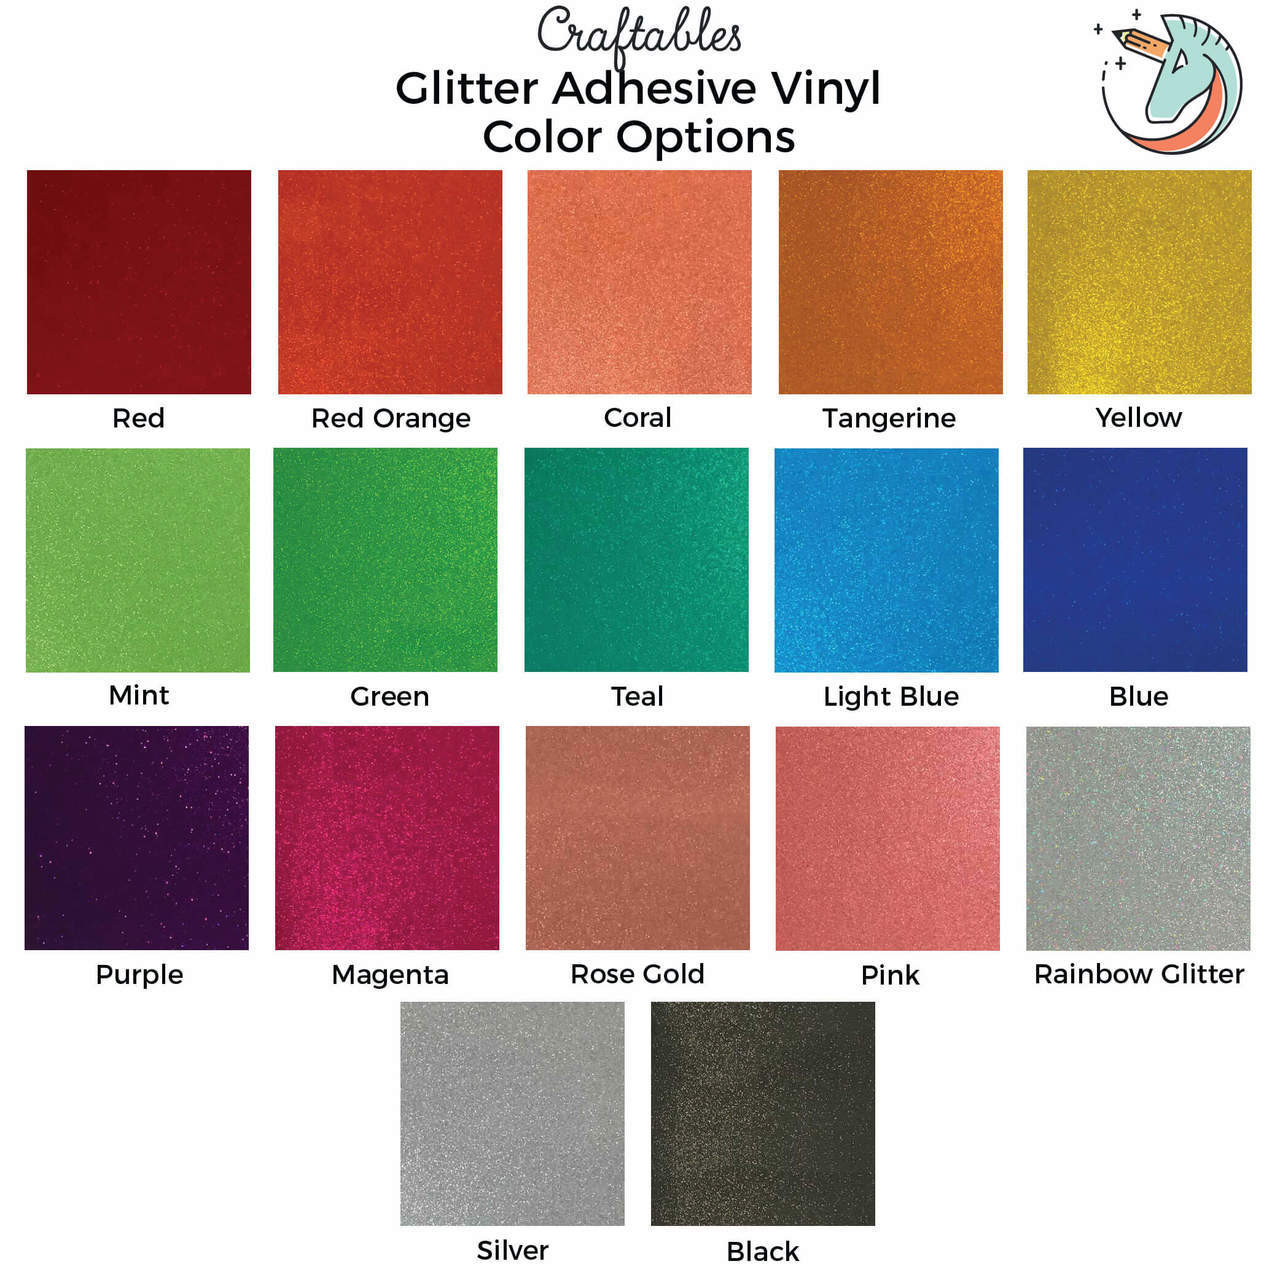 Silver Glitter Adhesive Vinyl Rolls By Craftables